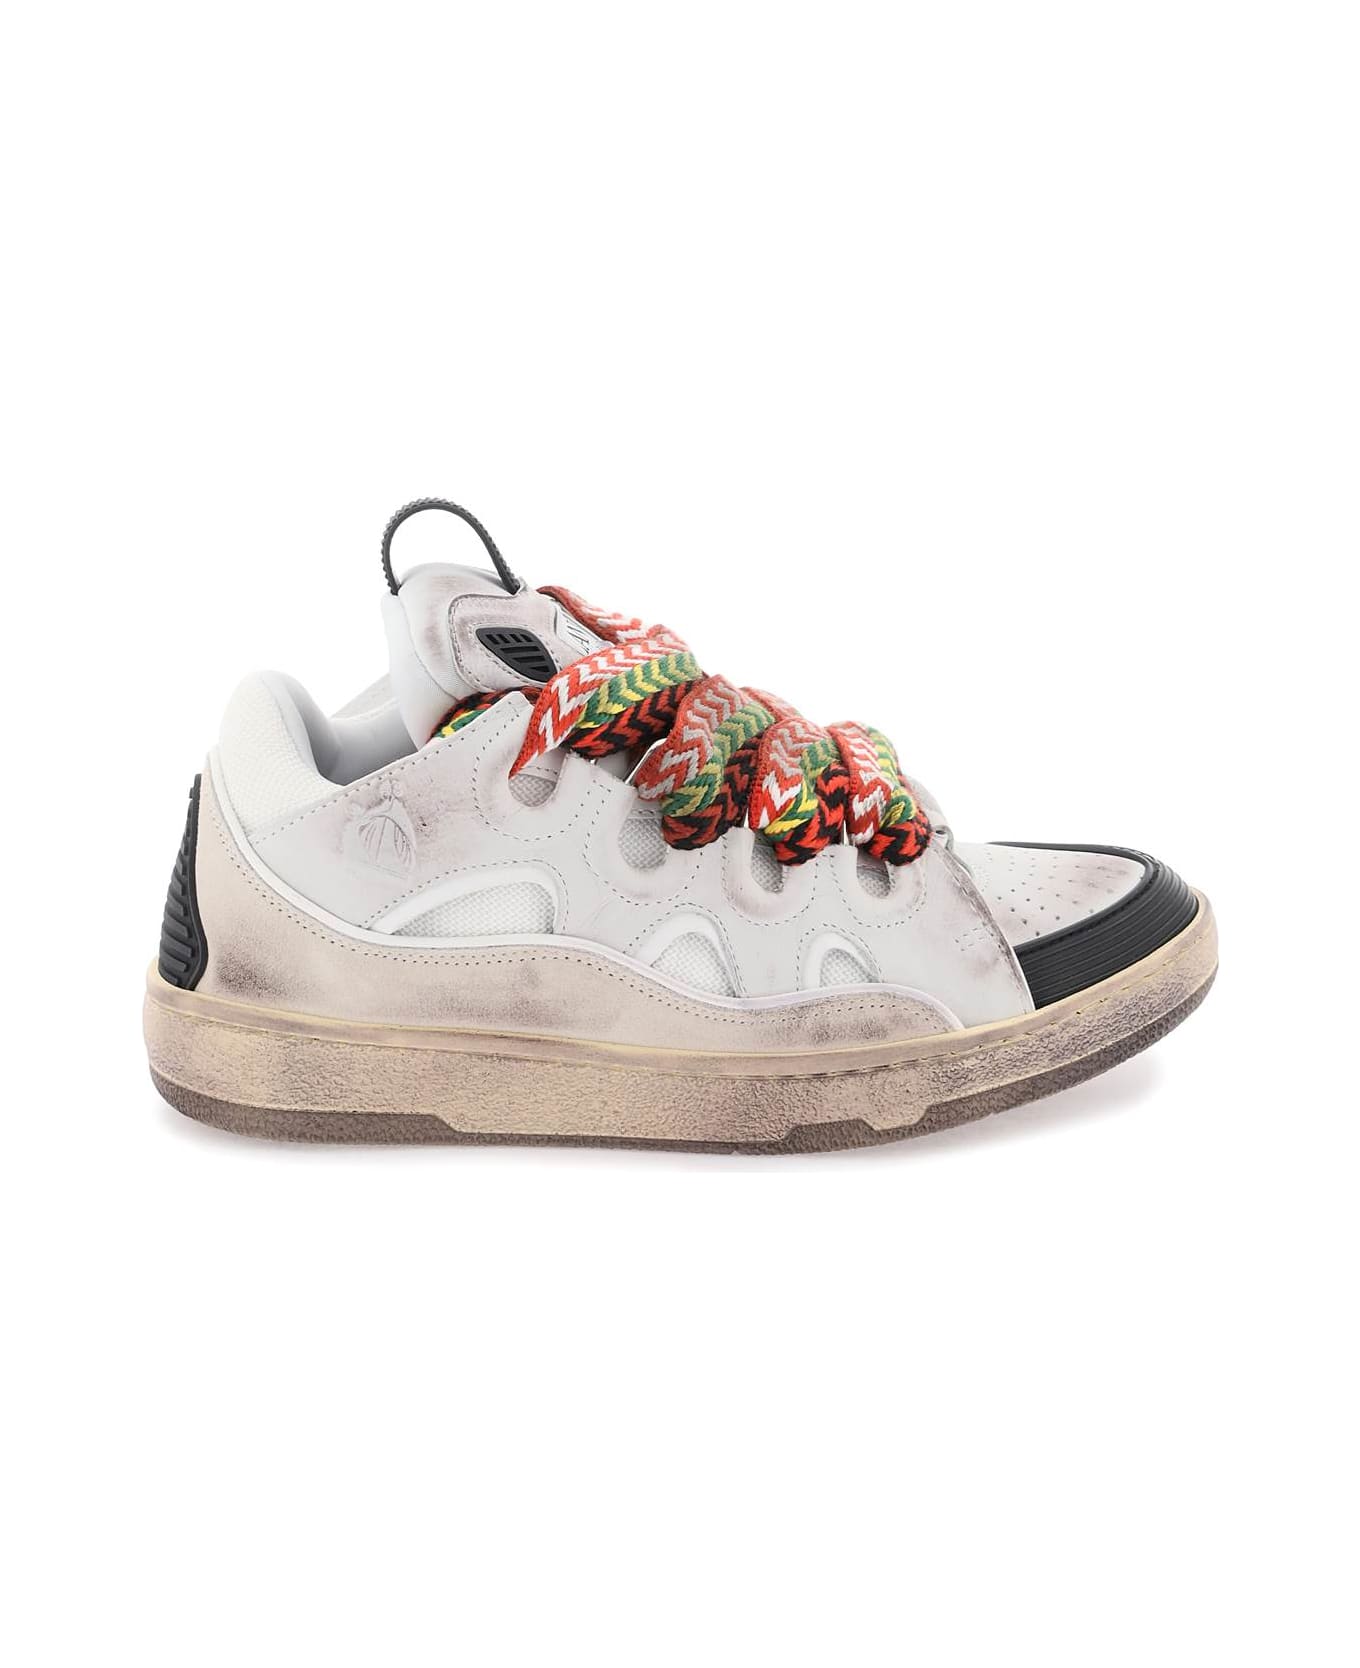 Lanvin Used-effect 'curb' Sneakers - White